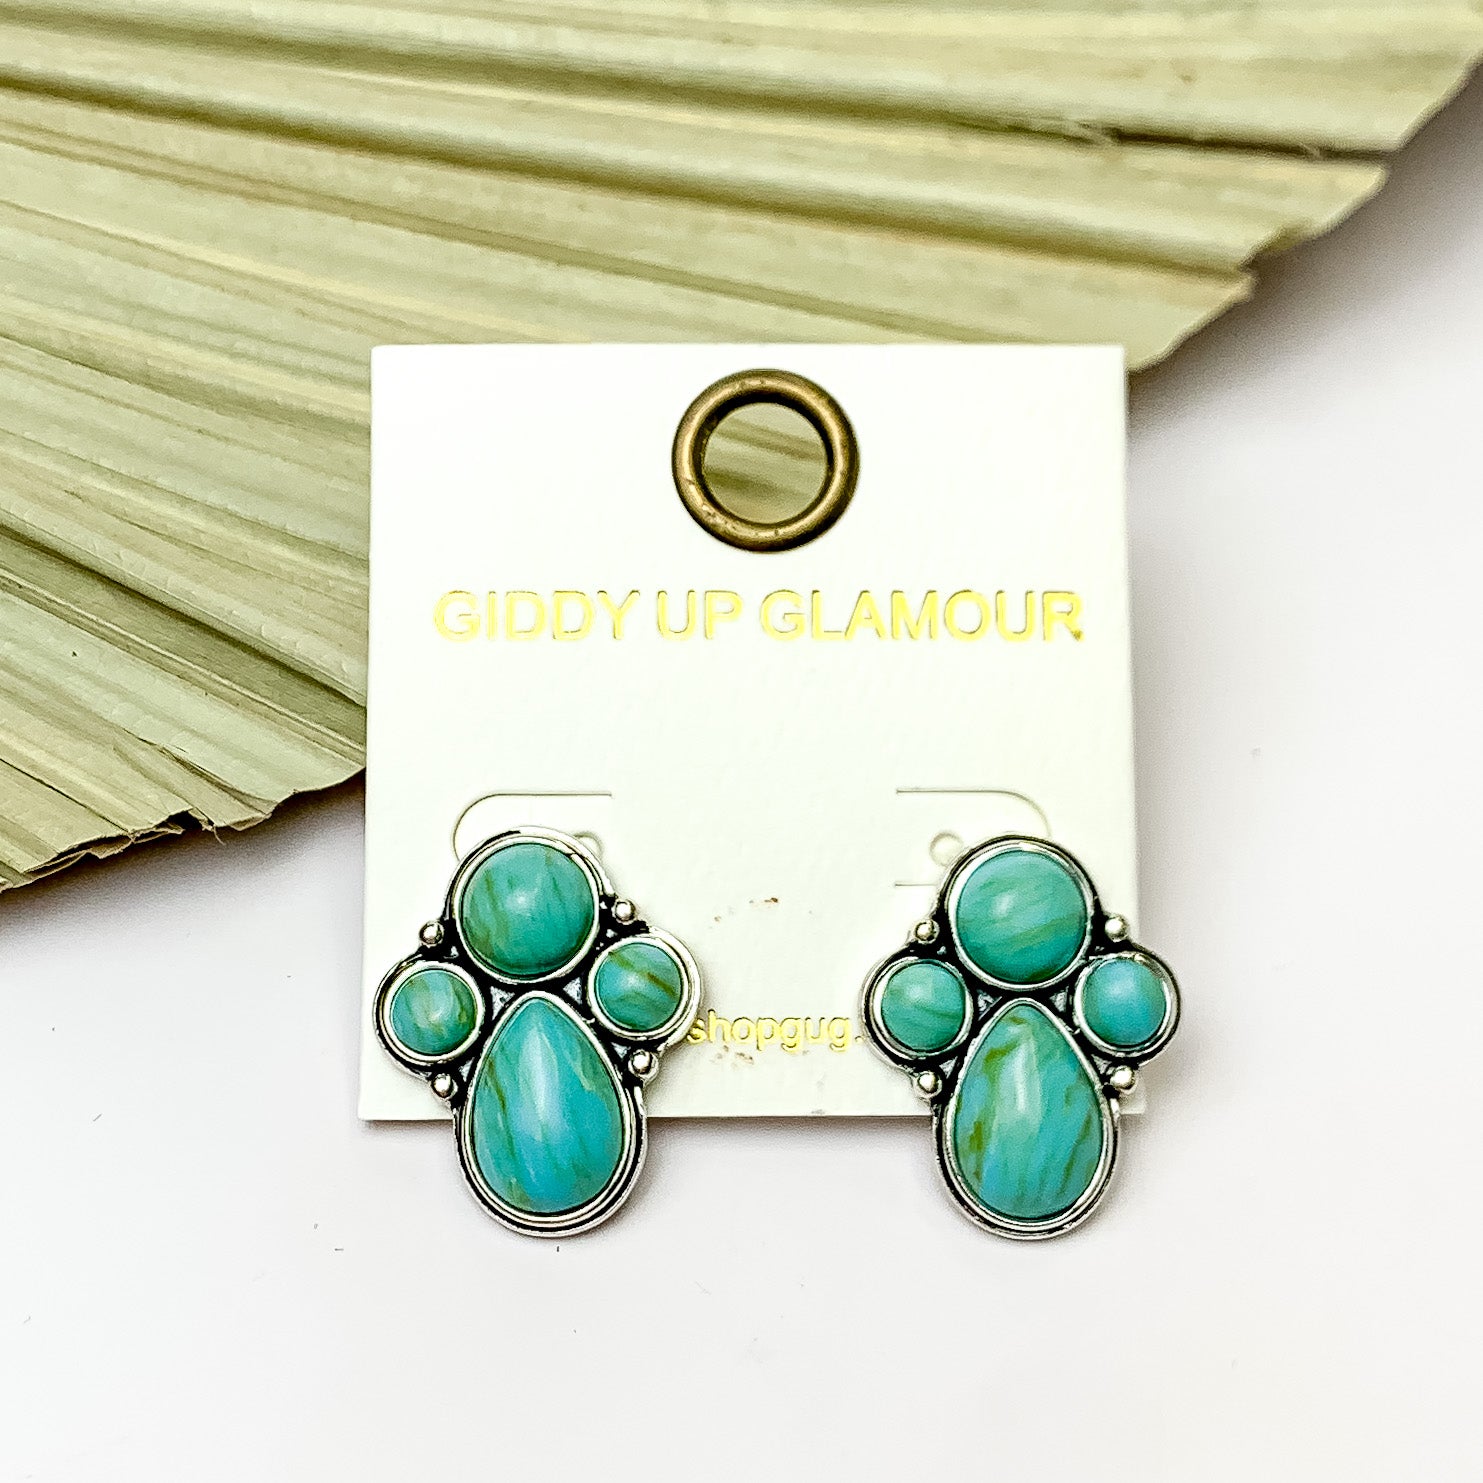 Silver Tone Cluster Stone Earrings in Turquoise Green. Pictured on a white background with a leaf fan behind the earrings. 